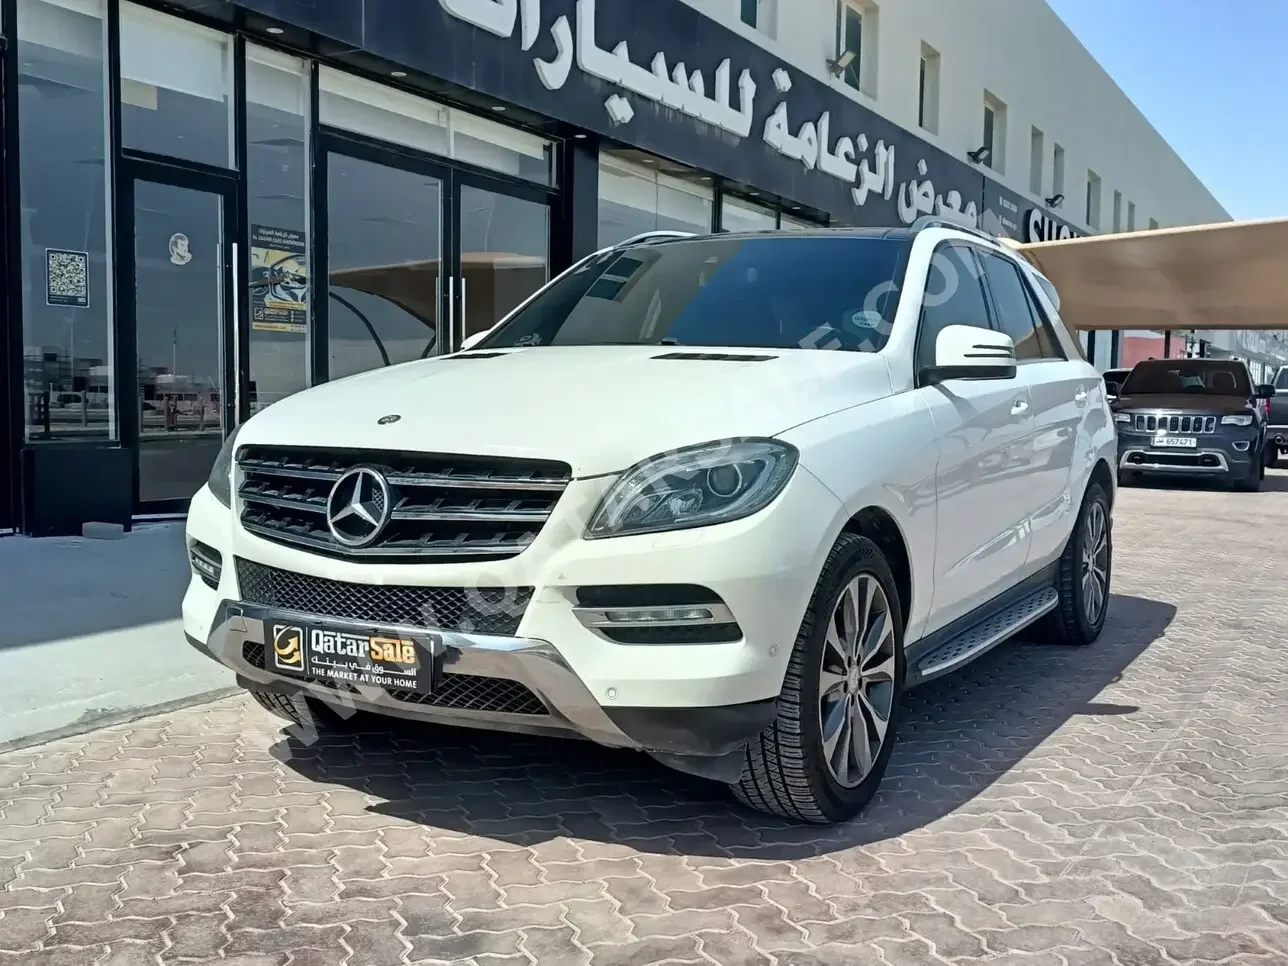 Mercedes-Benz  ML  400  2015  Automatic  160,000 Km  6 Cylinder  Four Wheel Drive (4WD)  SUV  White